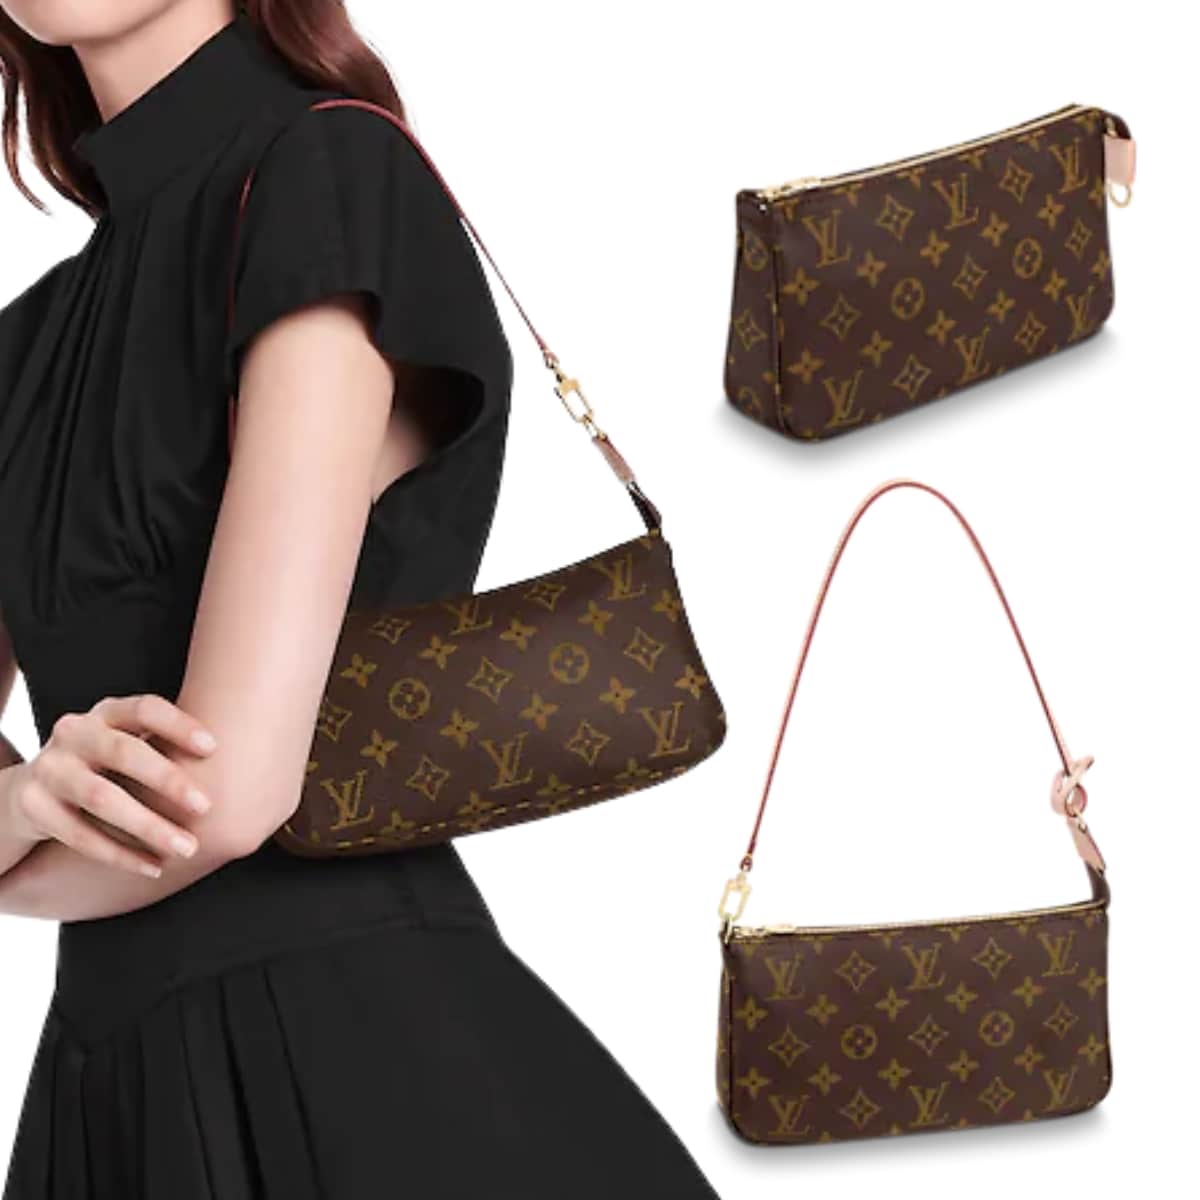 In Monogram canvas, the Pochette Accessoires easily carries all the daily necessities